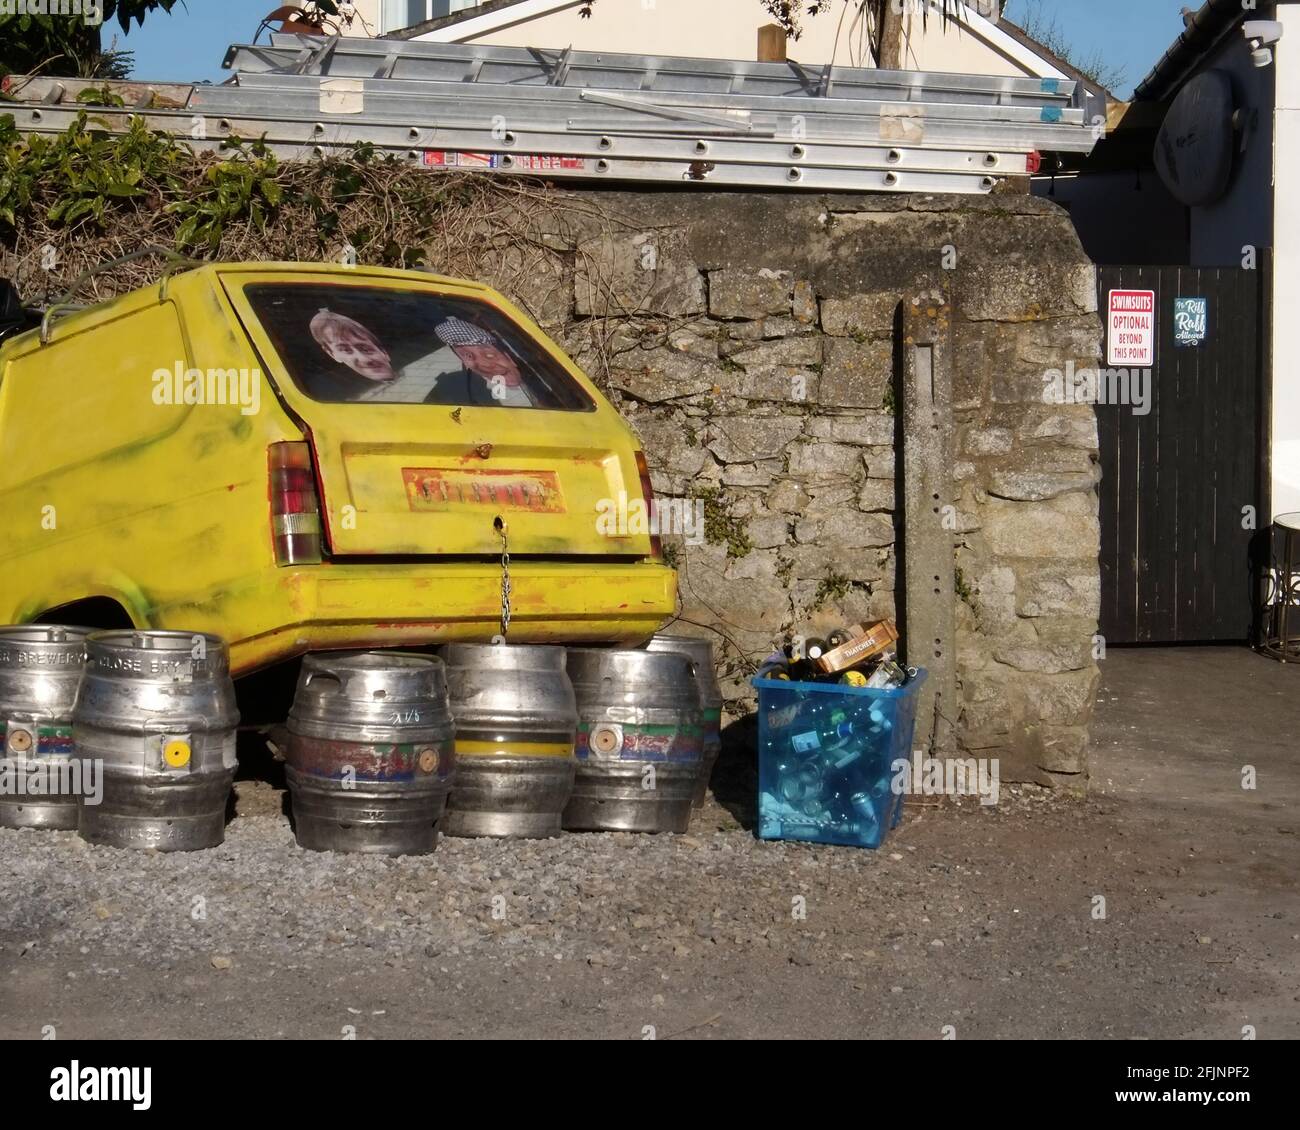 April 2021 - Only fools & horses three wheeler van crashed into a pub wall, used as advertising Stock Photo